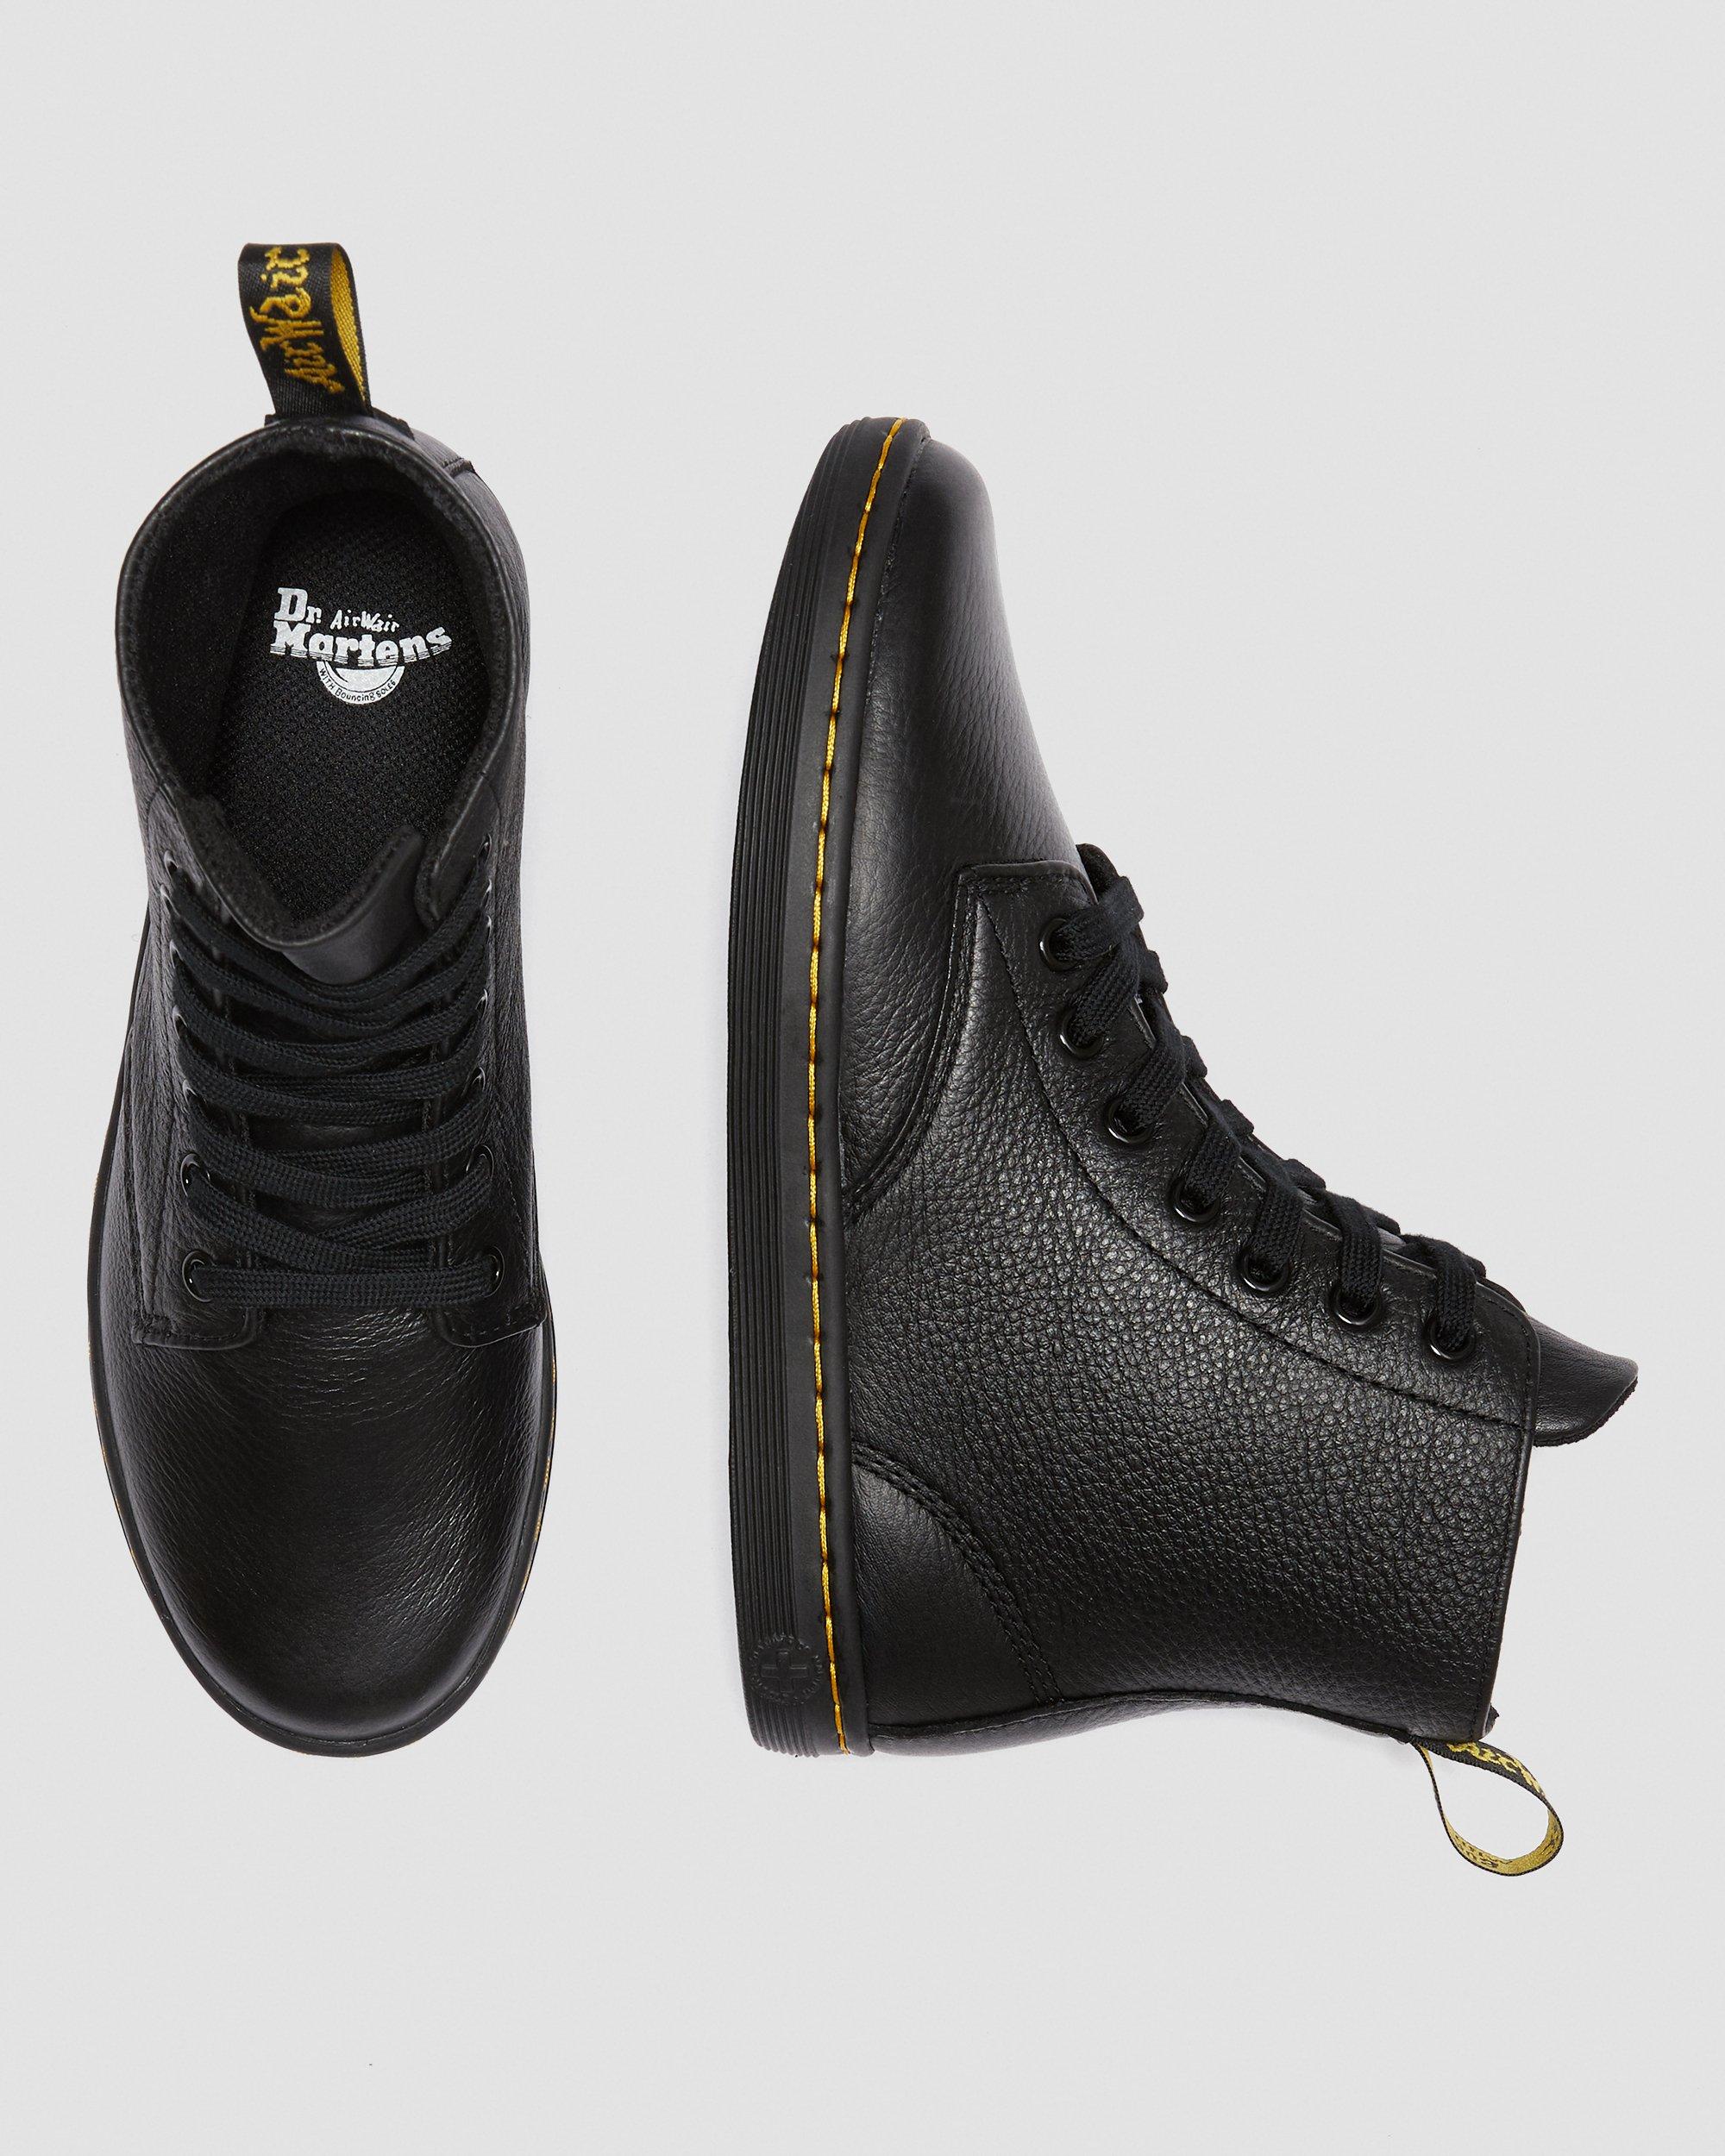 DR MARTENS Leyton Women's Leather Casual Boots